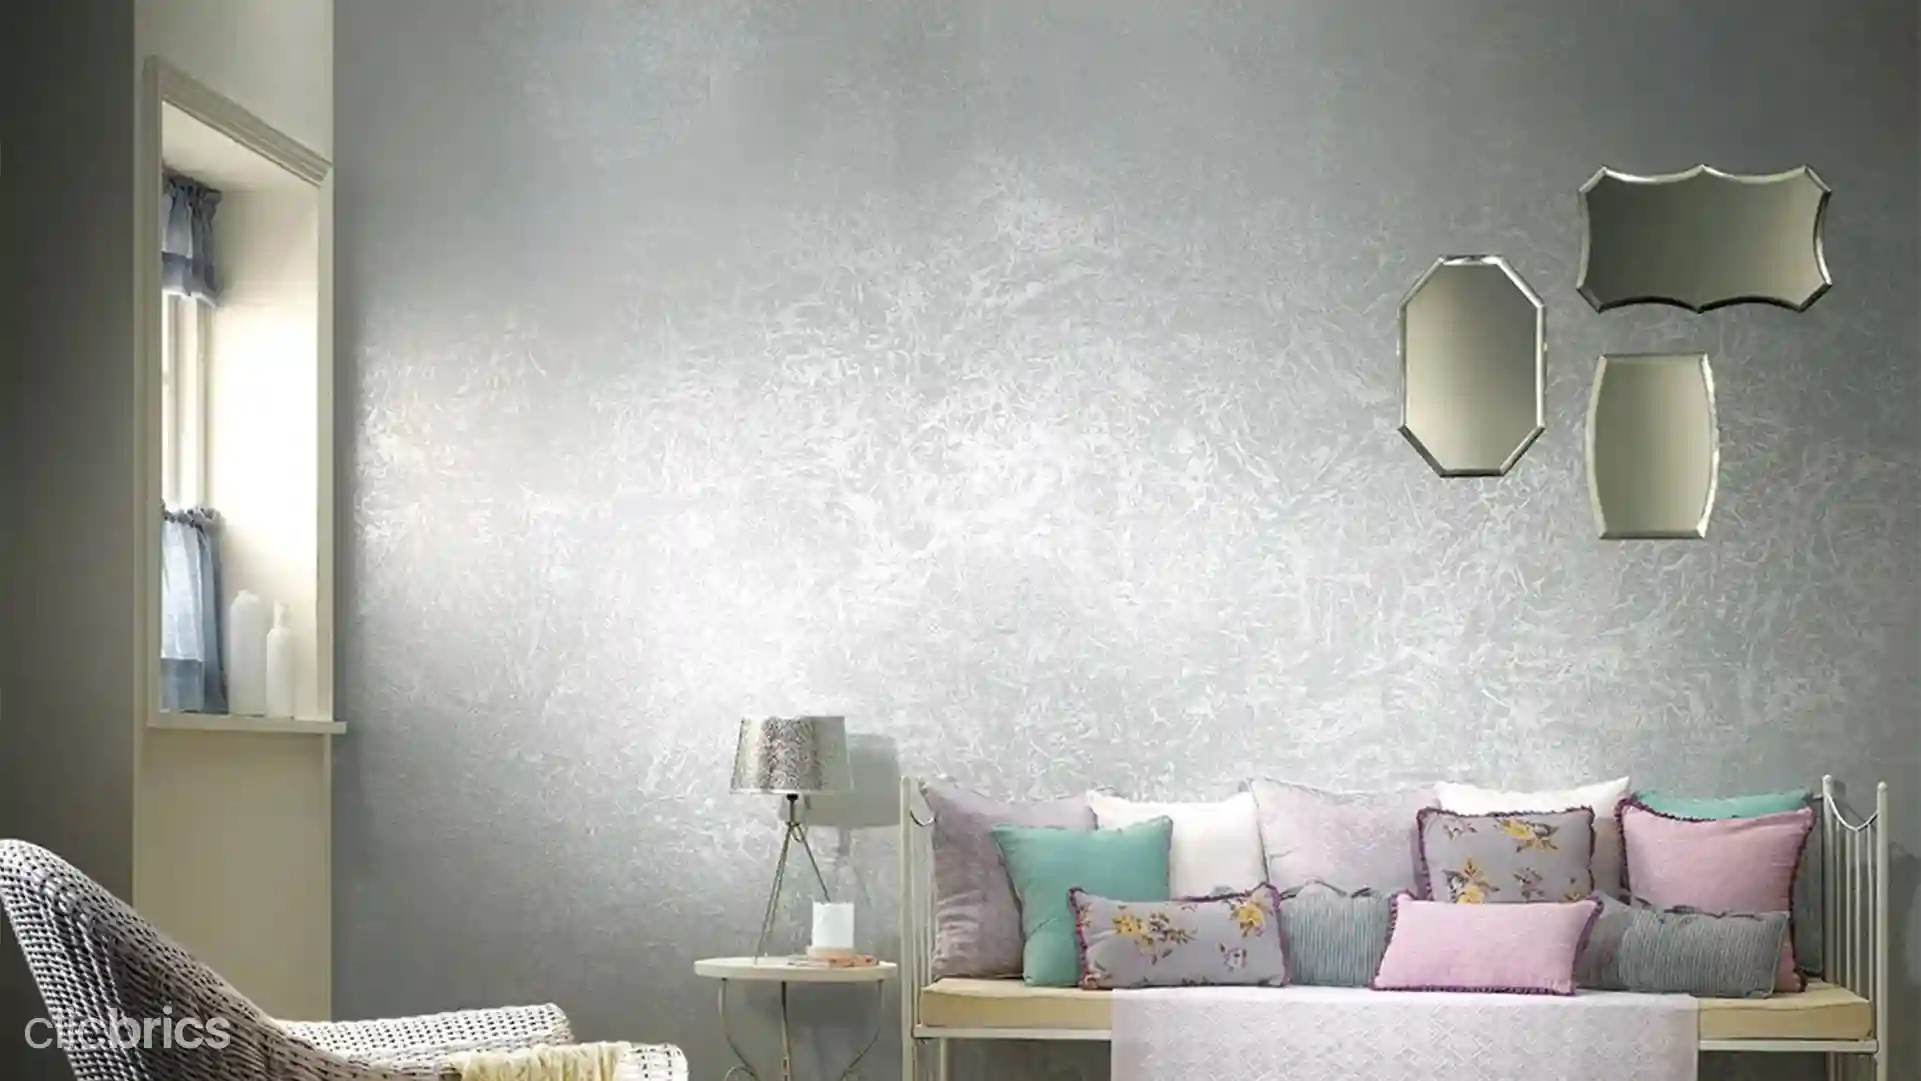  1674198519326 Get A Polished Look With Metallic Textured Wall.webp